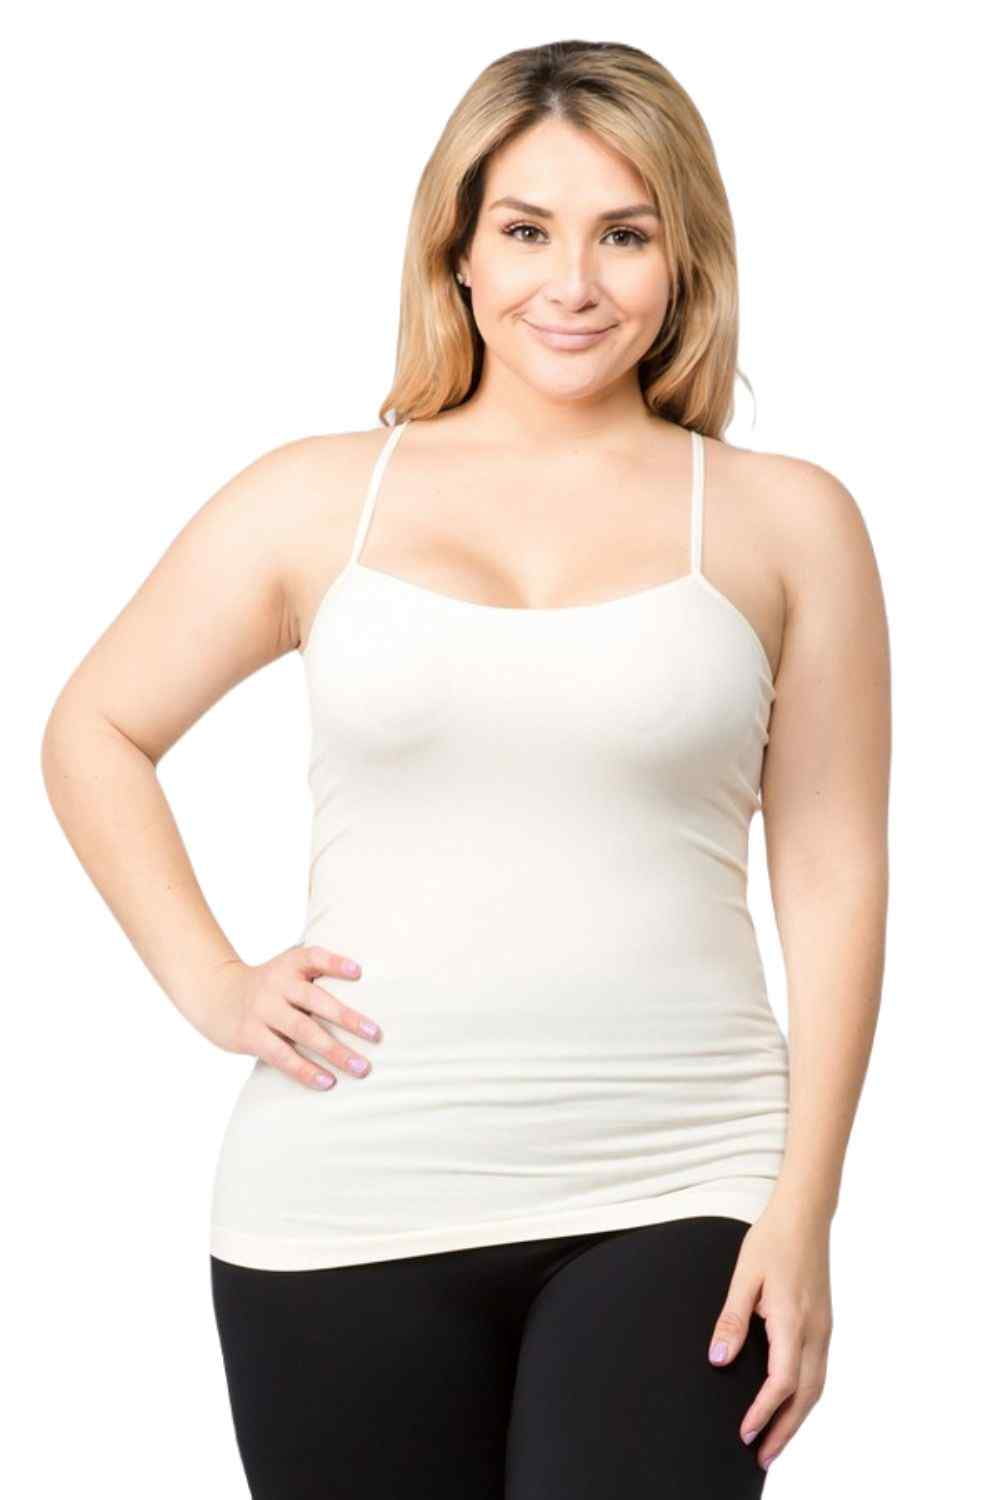 Women's Plus Size Seamless Criss-Cross Camisole. • Strappy detail on front  • Seamless design • Longline hem • Fits your body like a glove • Spaghetti  Straps • Ultra Soft • Stretchy